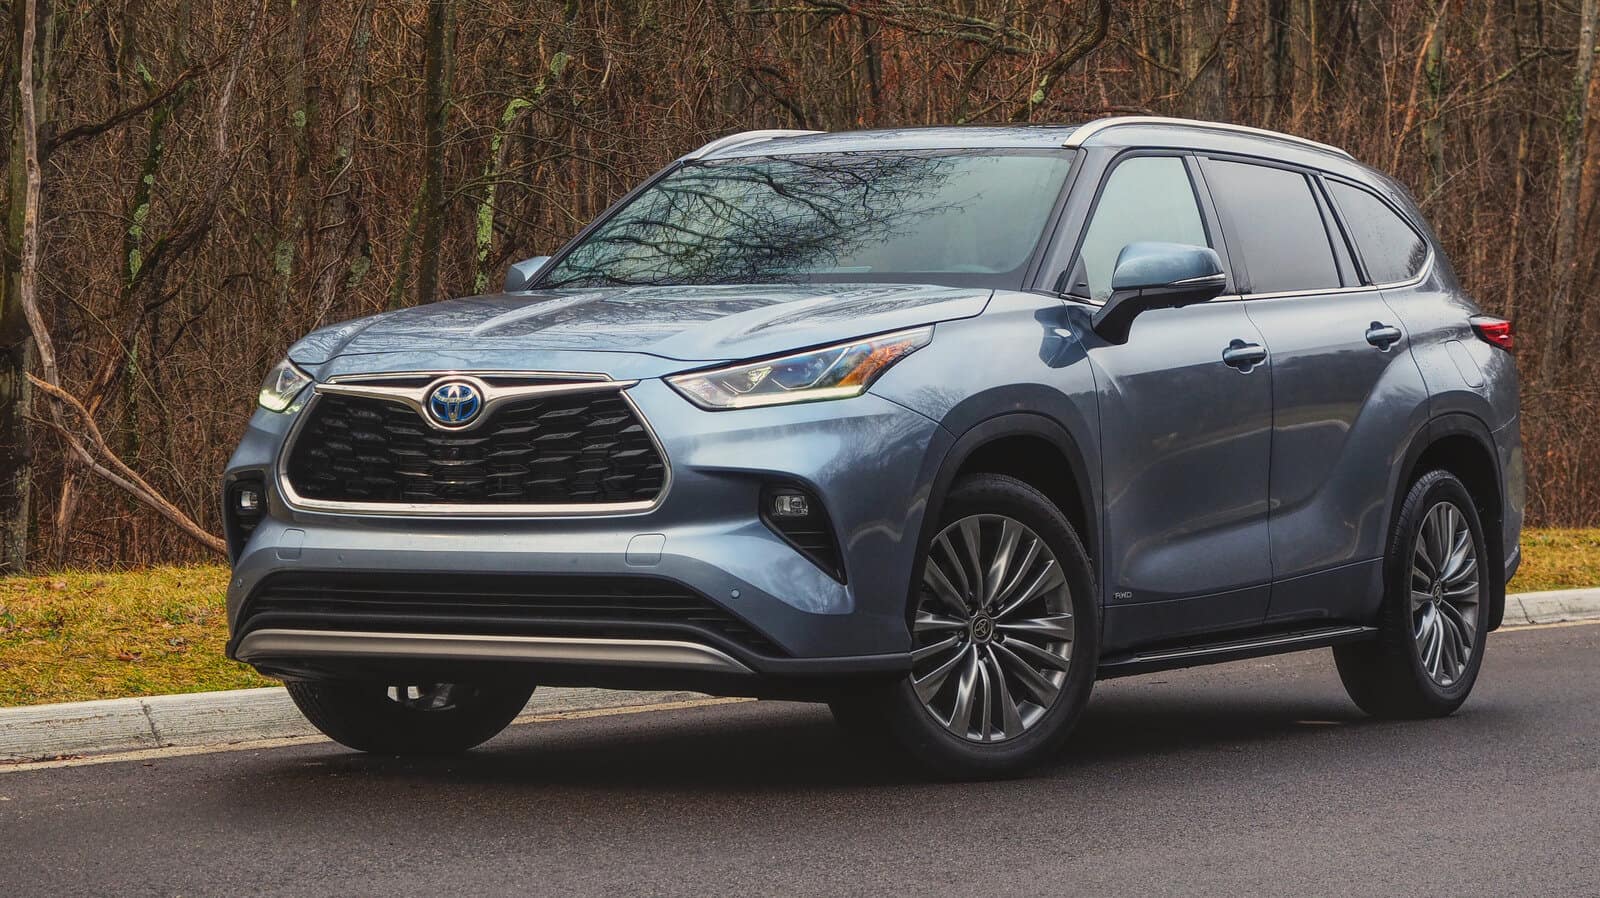 The Future of SUVs: A Sneak Peek into the High-Tech Features of the 2023 Toyota Highlander Hybrid - The future of SUVs: The 2023 Toyota Highlander Hybrid